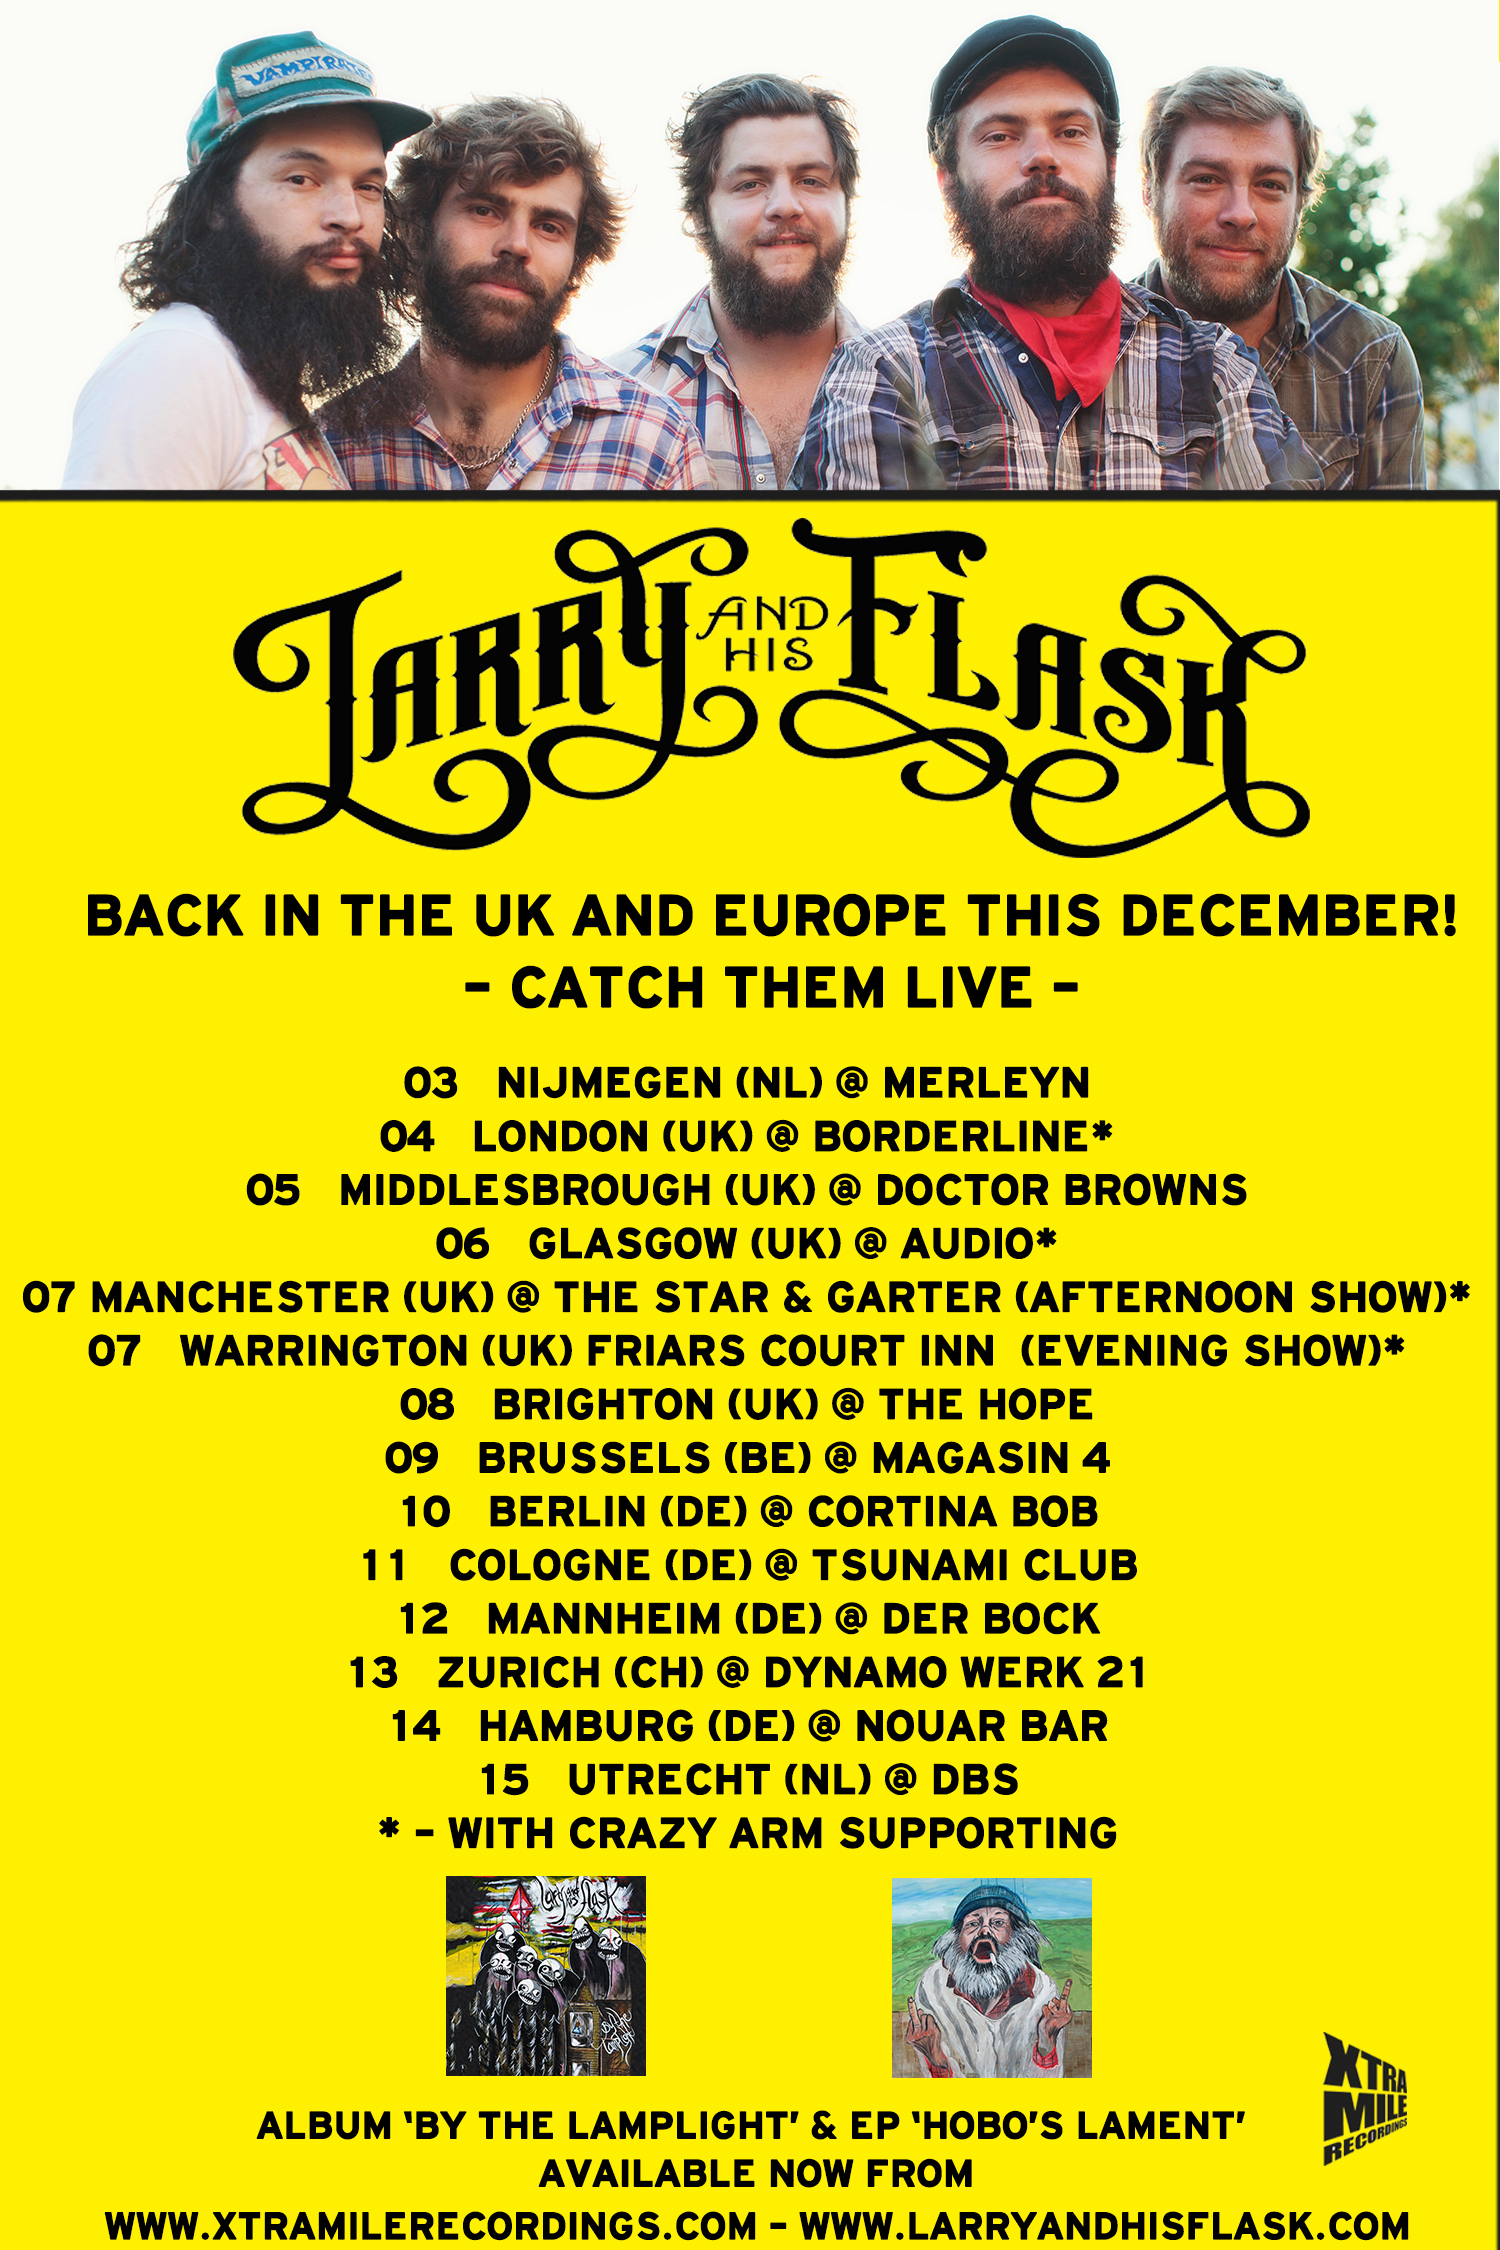 Larry and His Flask in Europe this month!